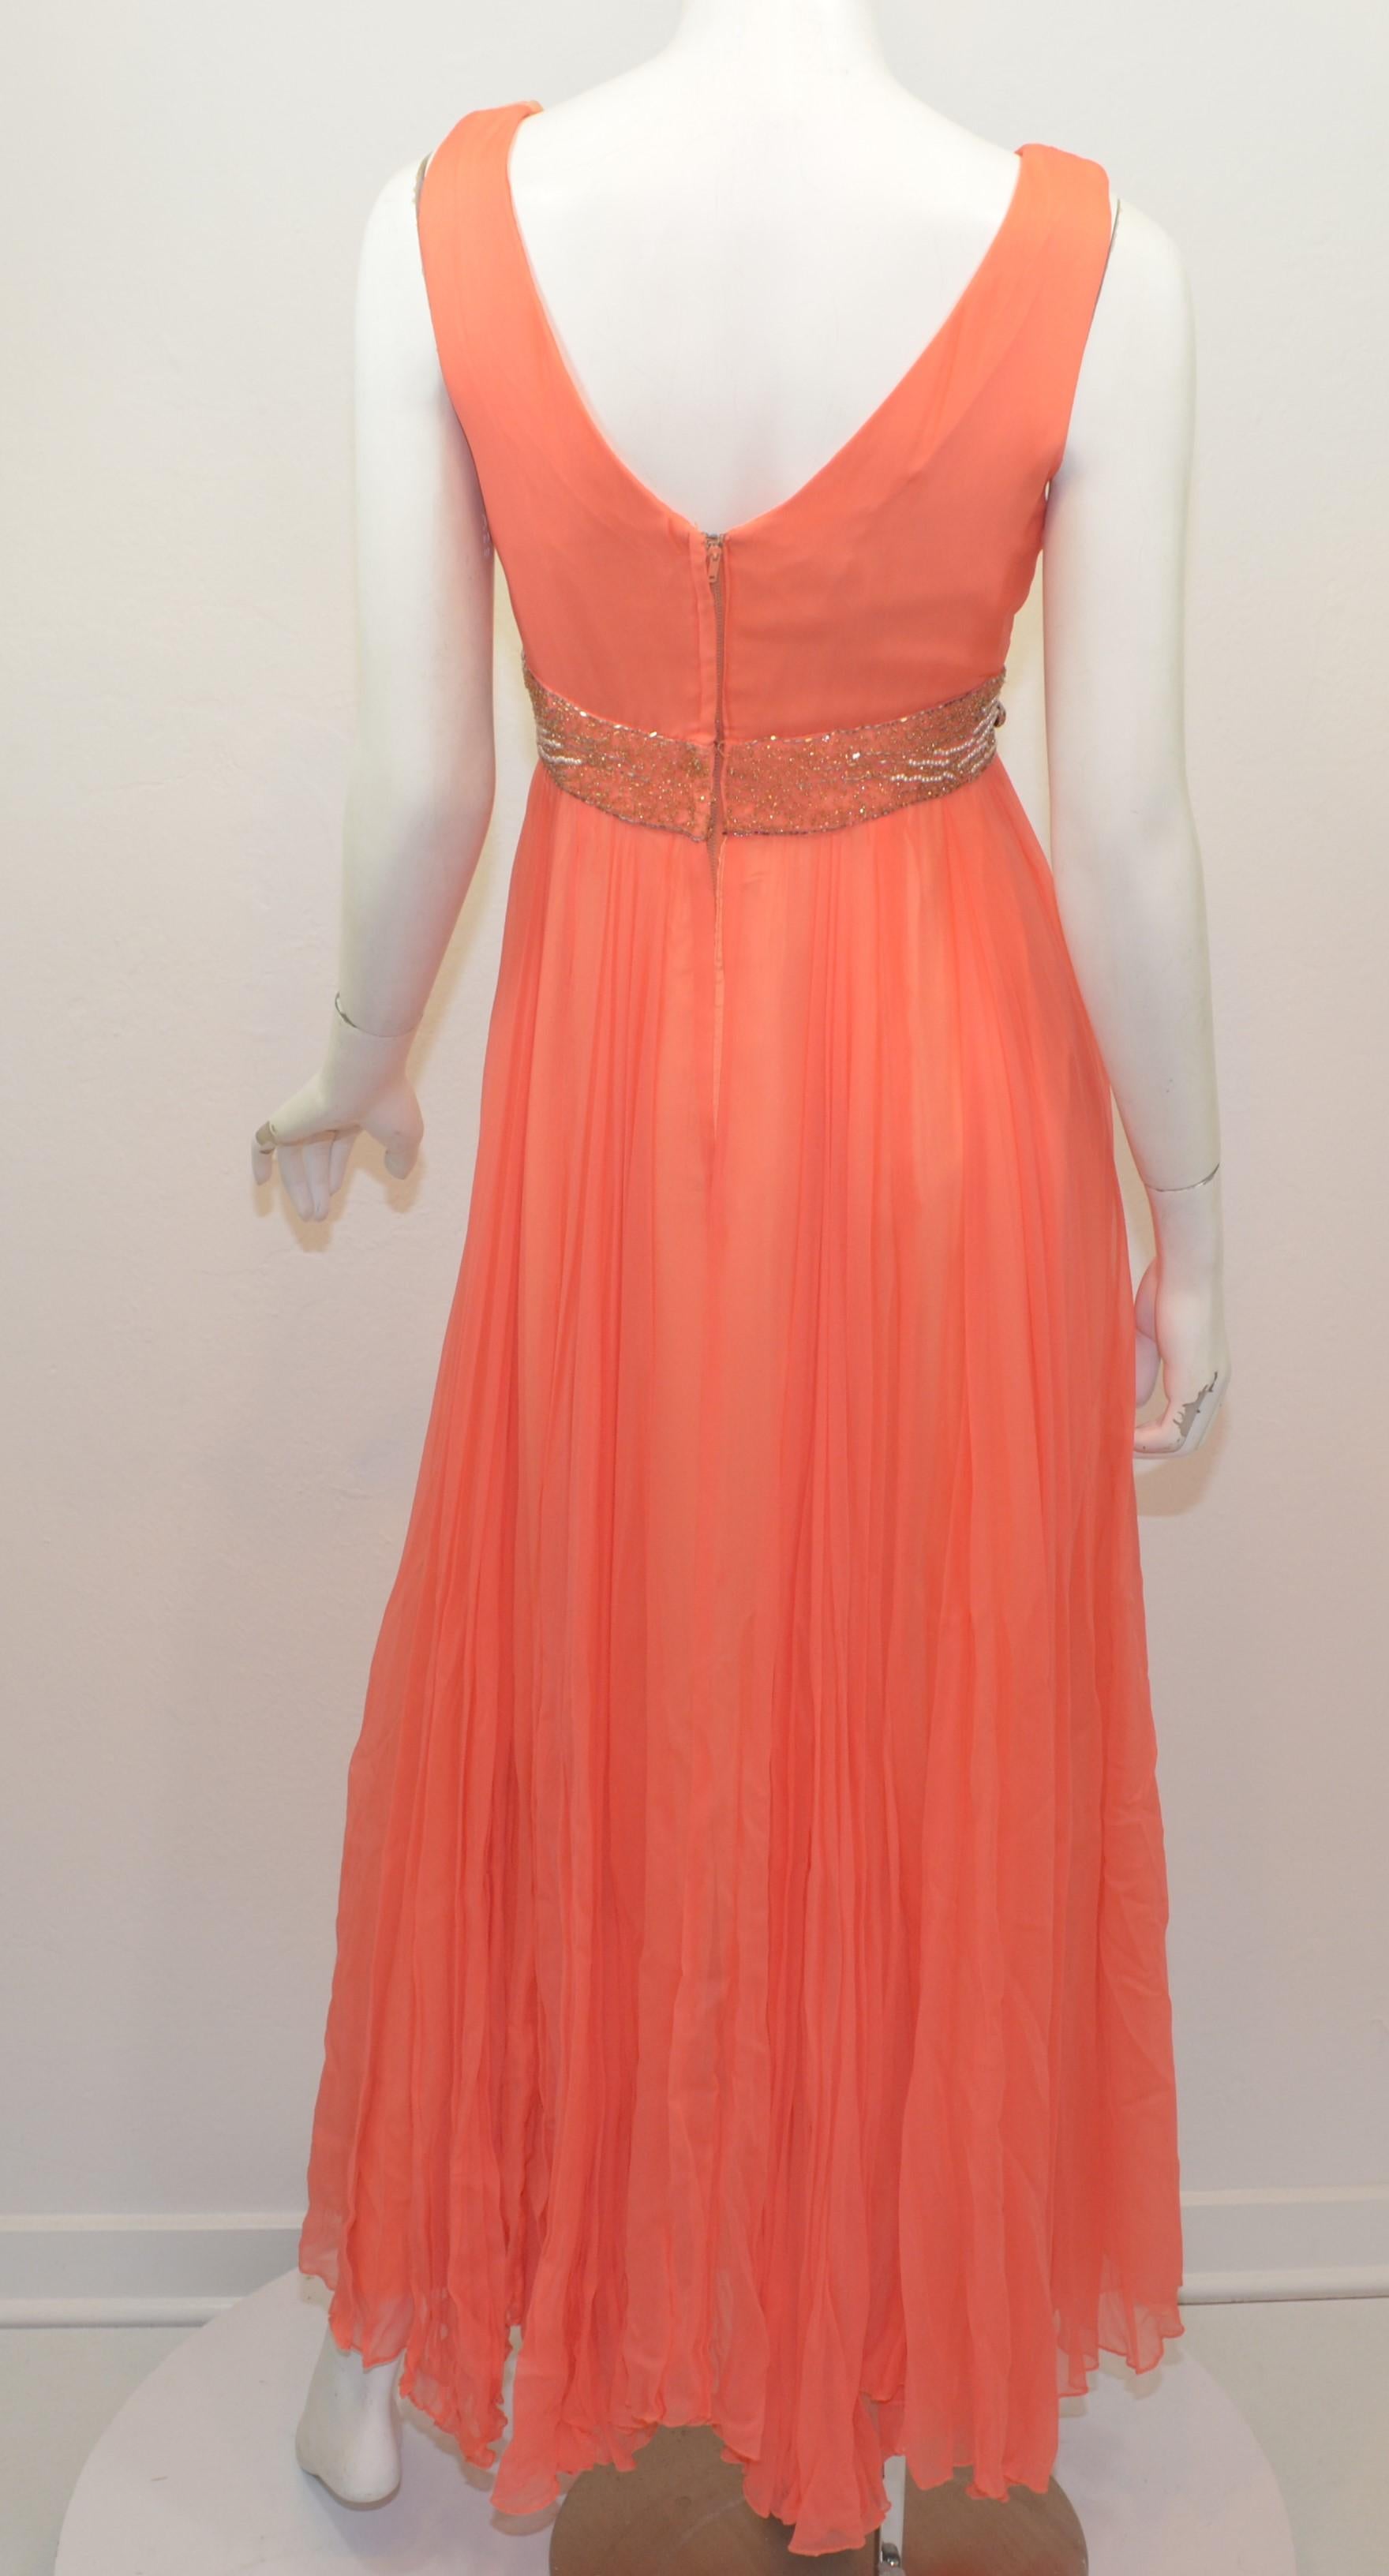 1950's Vintage Judd’s Coral Dress with Bead Embellishing 1